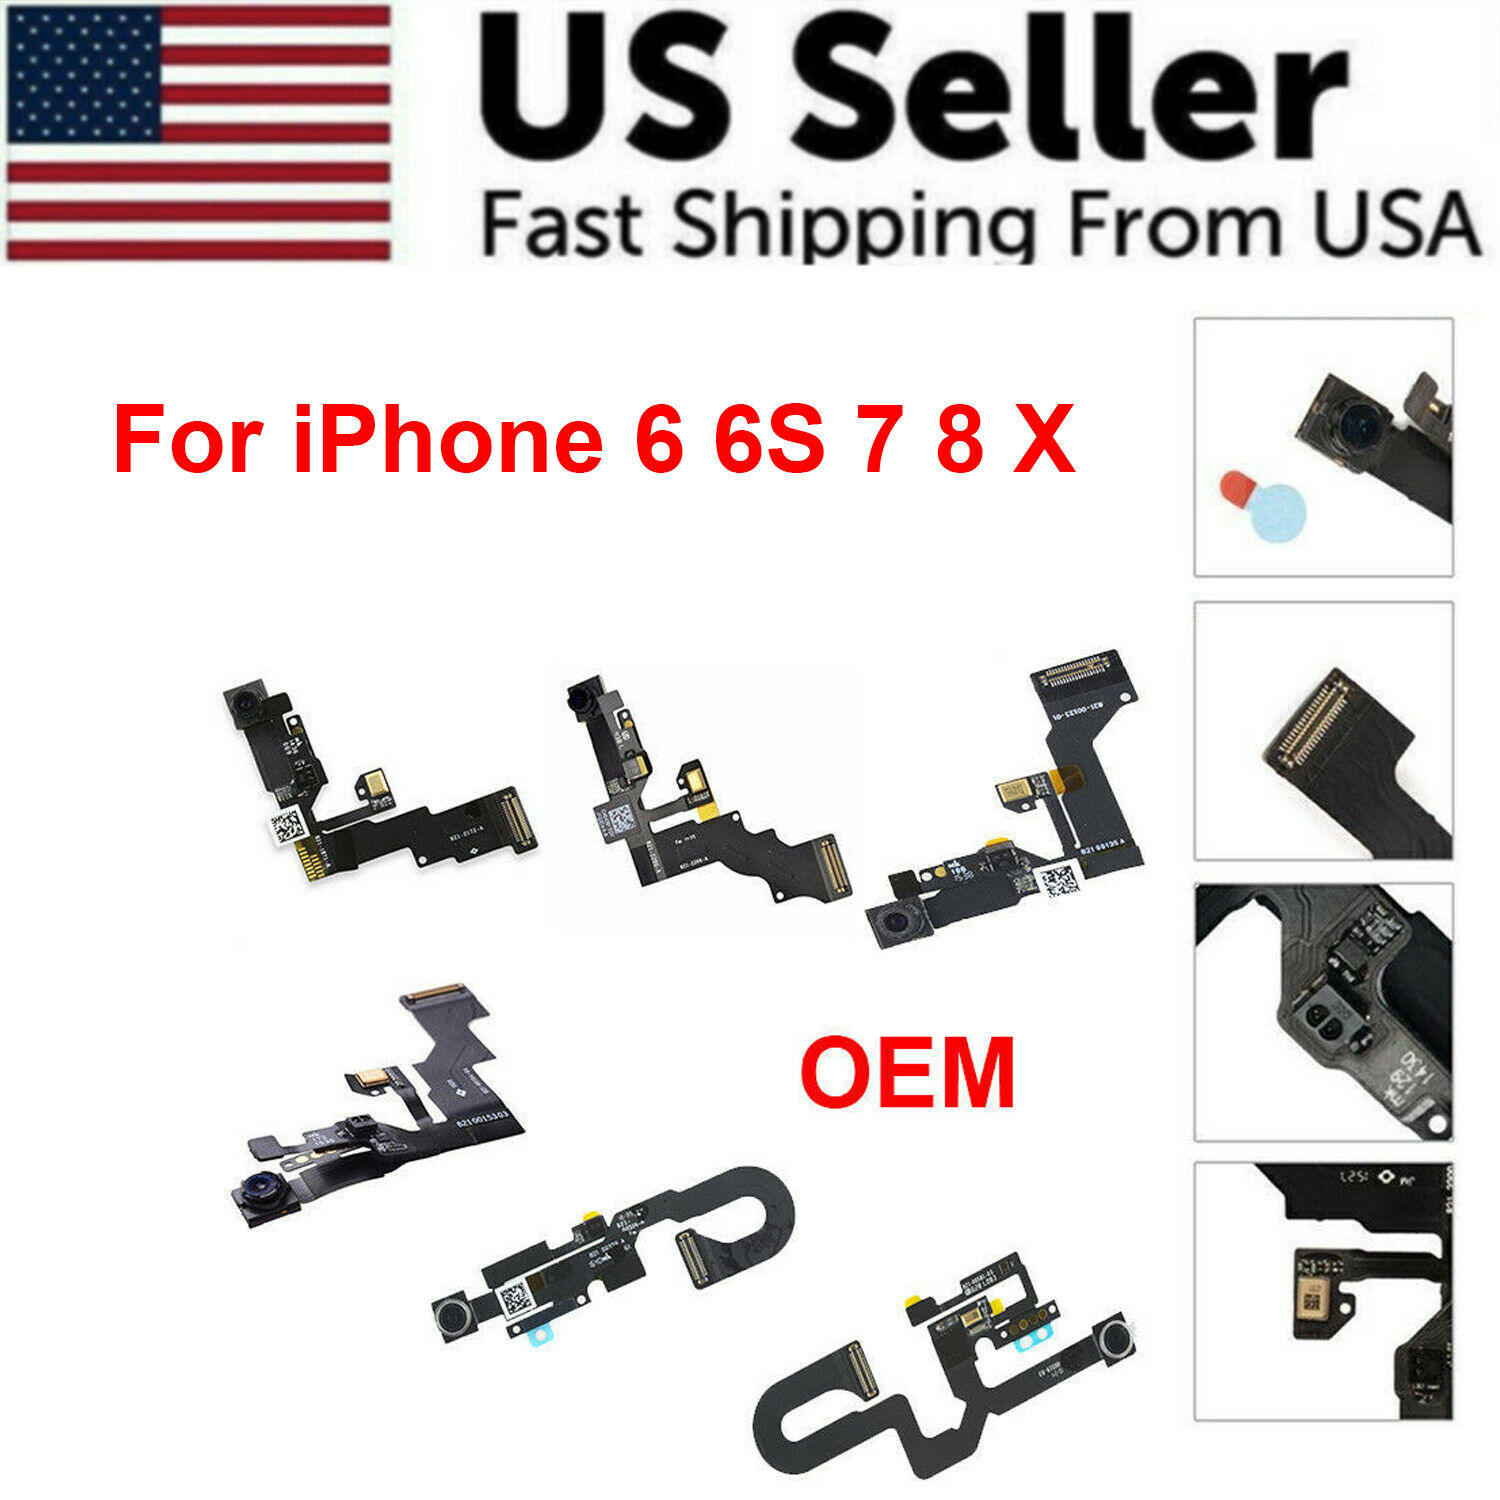 Oem Spec Front Face Camera Proximity Light Sensor Cable For Iphone 6 6s Plus 7 X